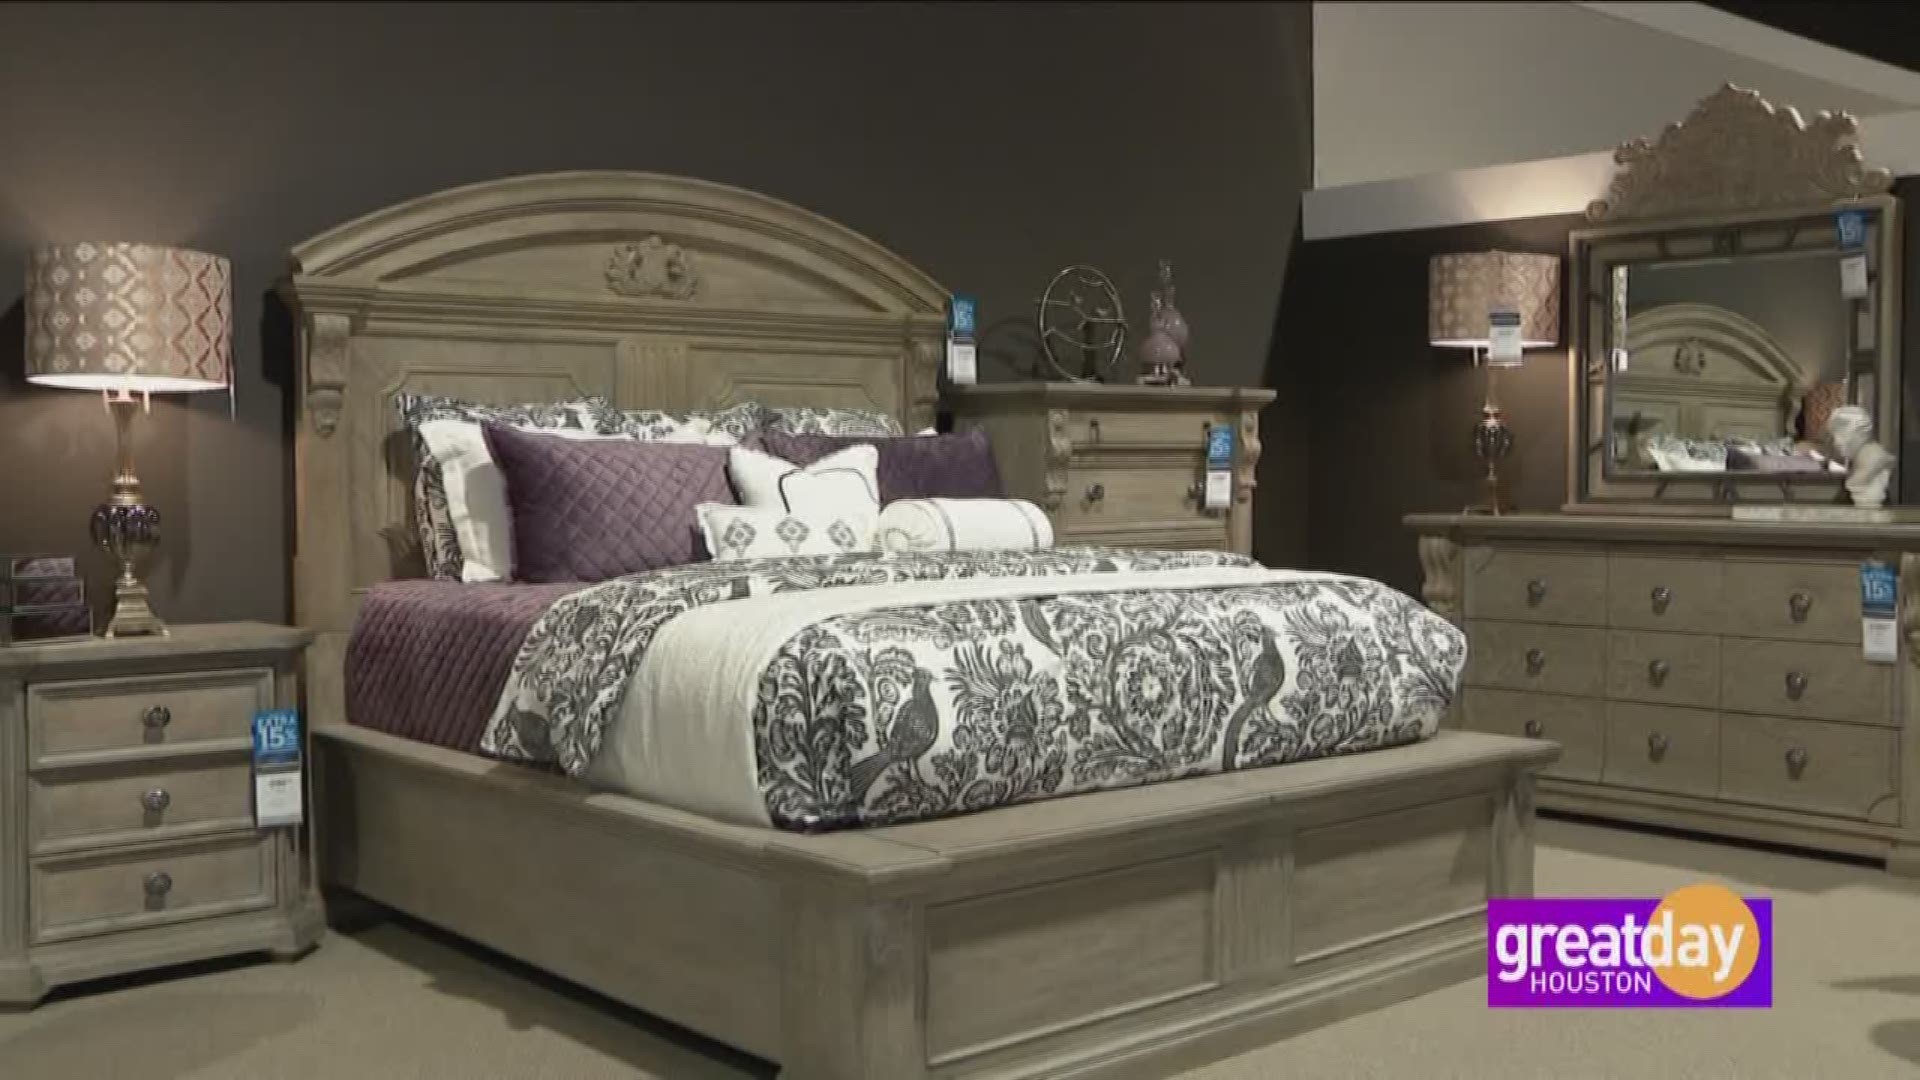 Come into Star Furniture and Mattresses at their new location in Cypress at the Northeast corner of Barker Cypress and Hwy 90.